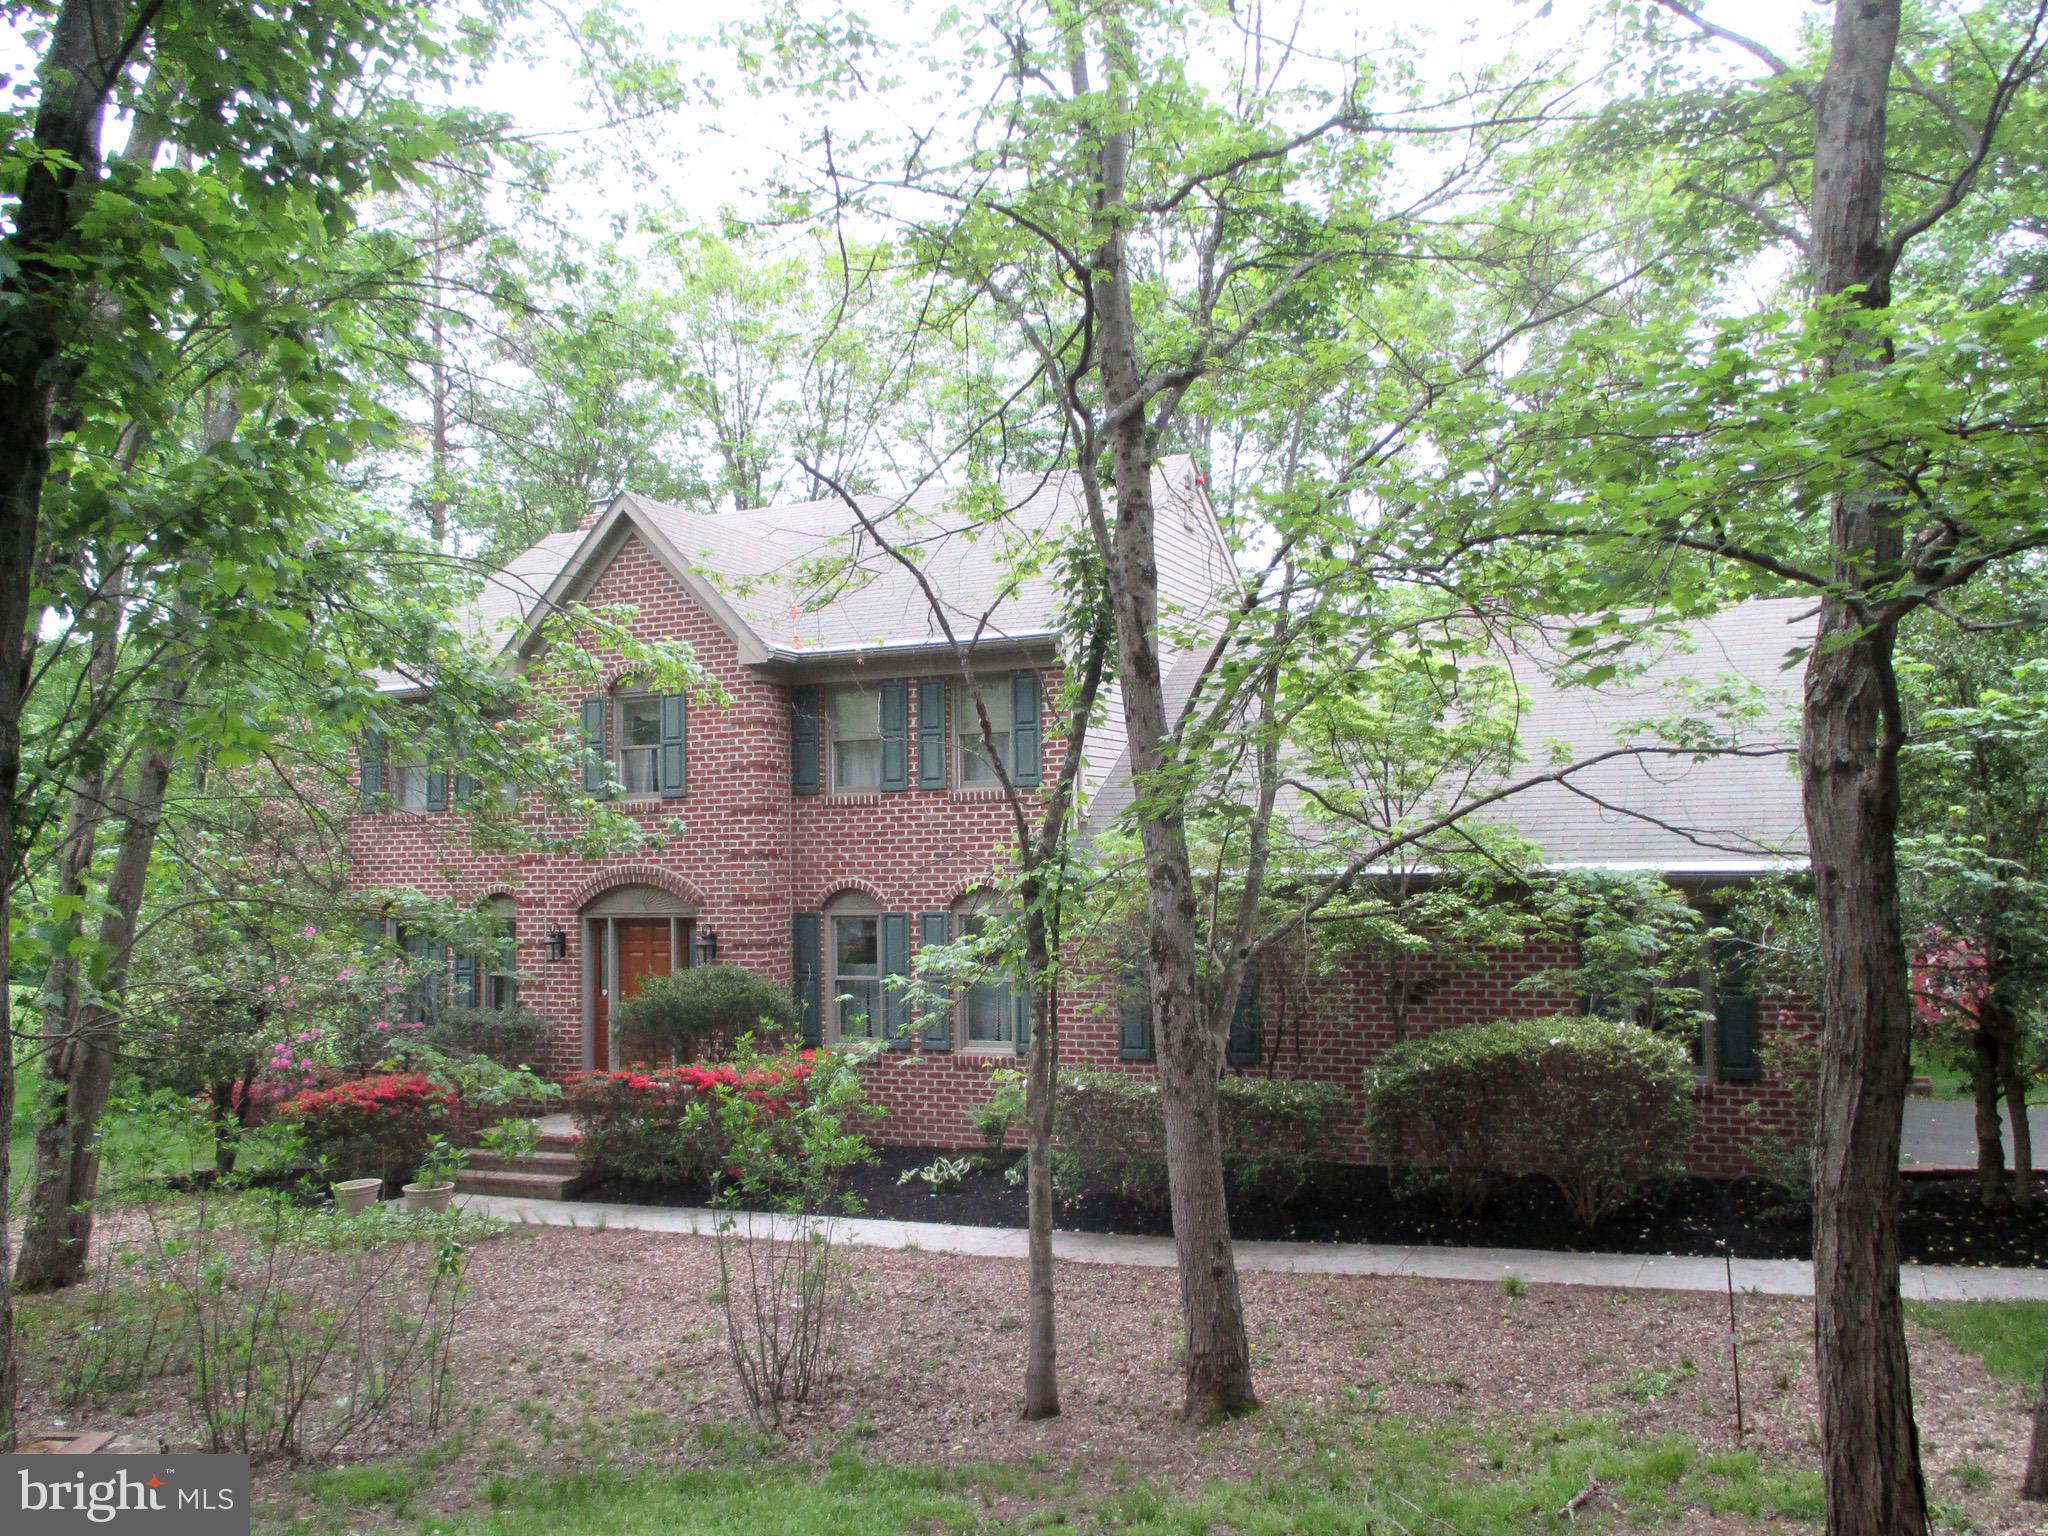 a front view of a house with a yard and large tree